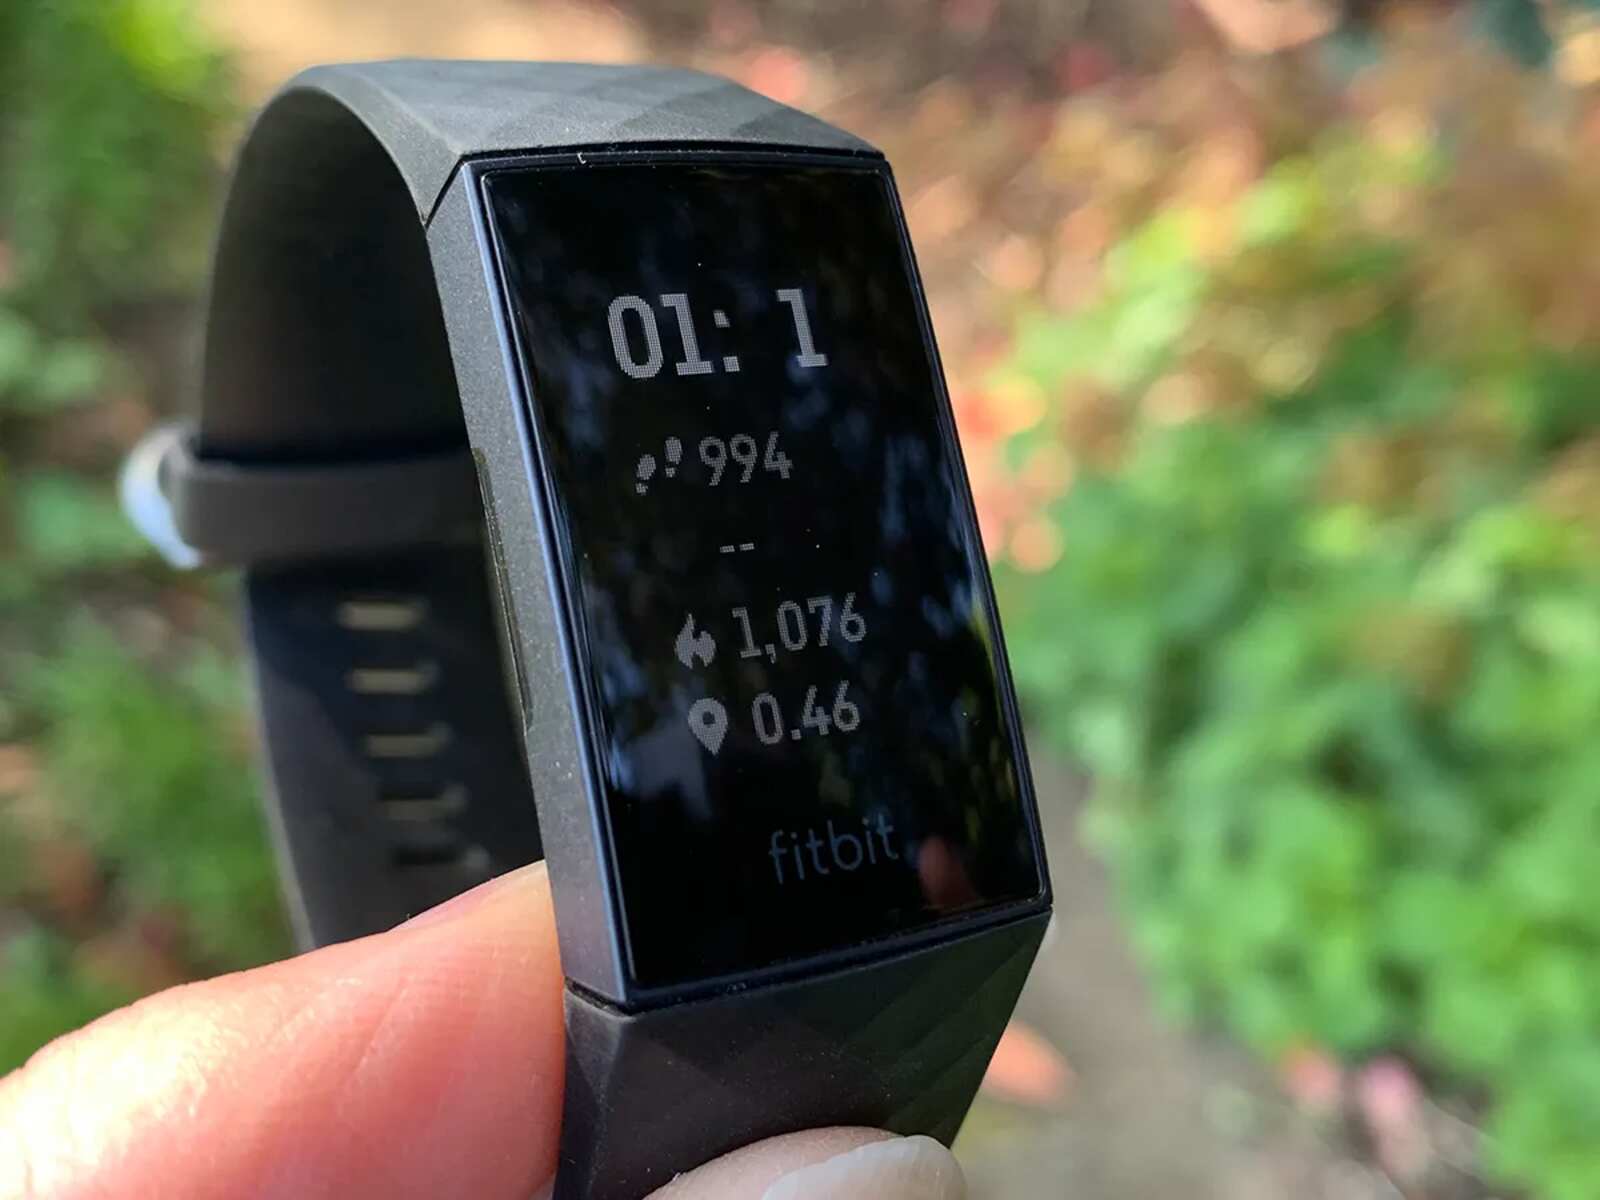 Dim Screen Dilemma: Troubleshooting Why Your Fitbit Screen Is Dim